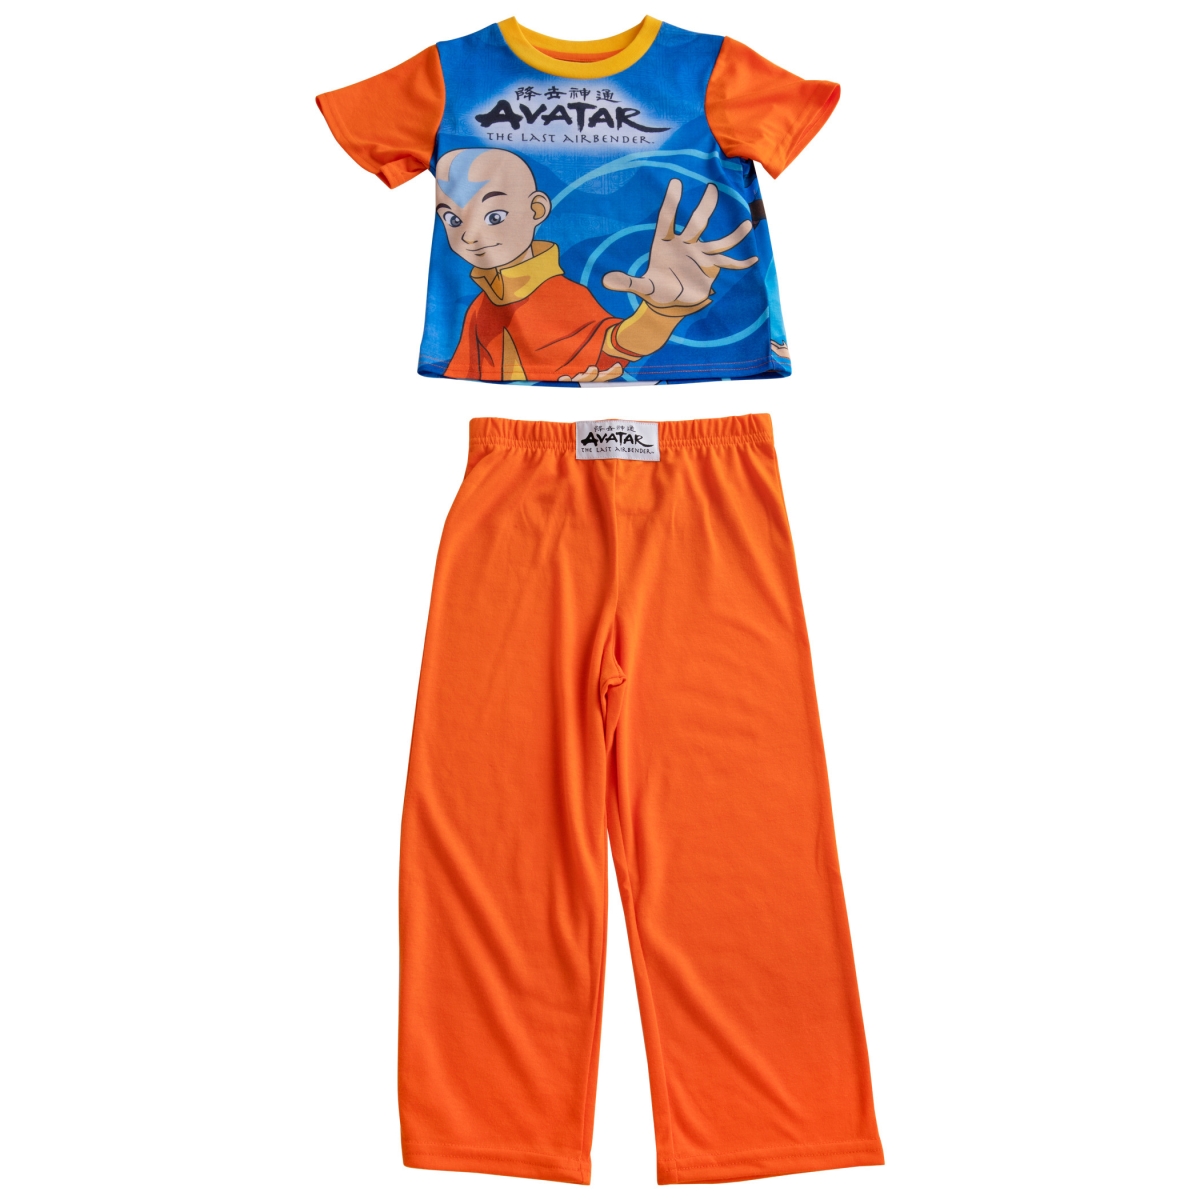 Picture of Avatar the Last Airbender 830415-size4 Avatar the Last Airbender Pajama Shirt & Pant Set - Size 4